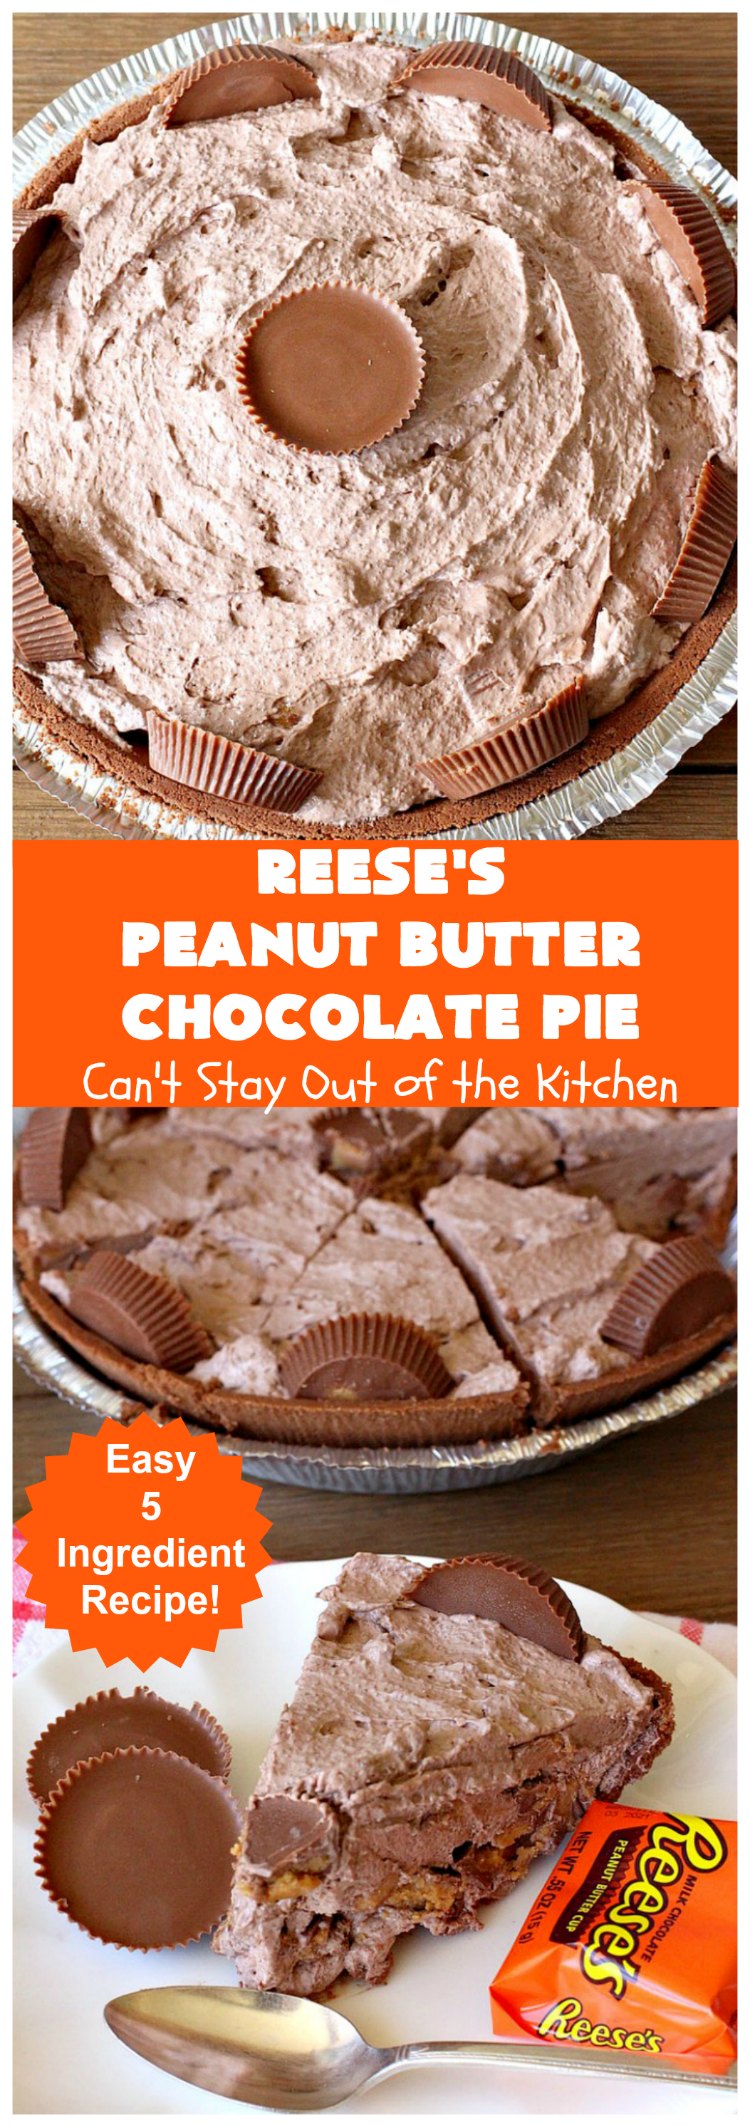 Reese's Peanut Butter Chocolate Pie | Can't Stay Out of the Kitchen